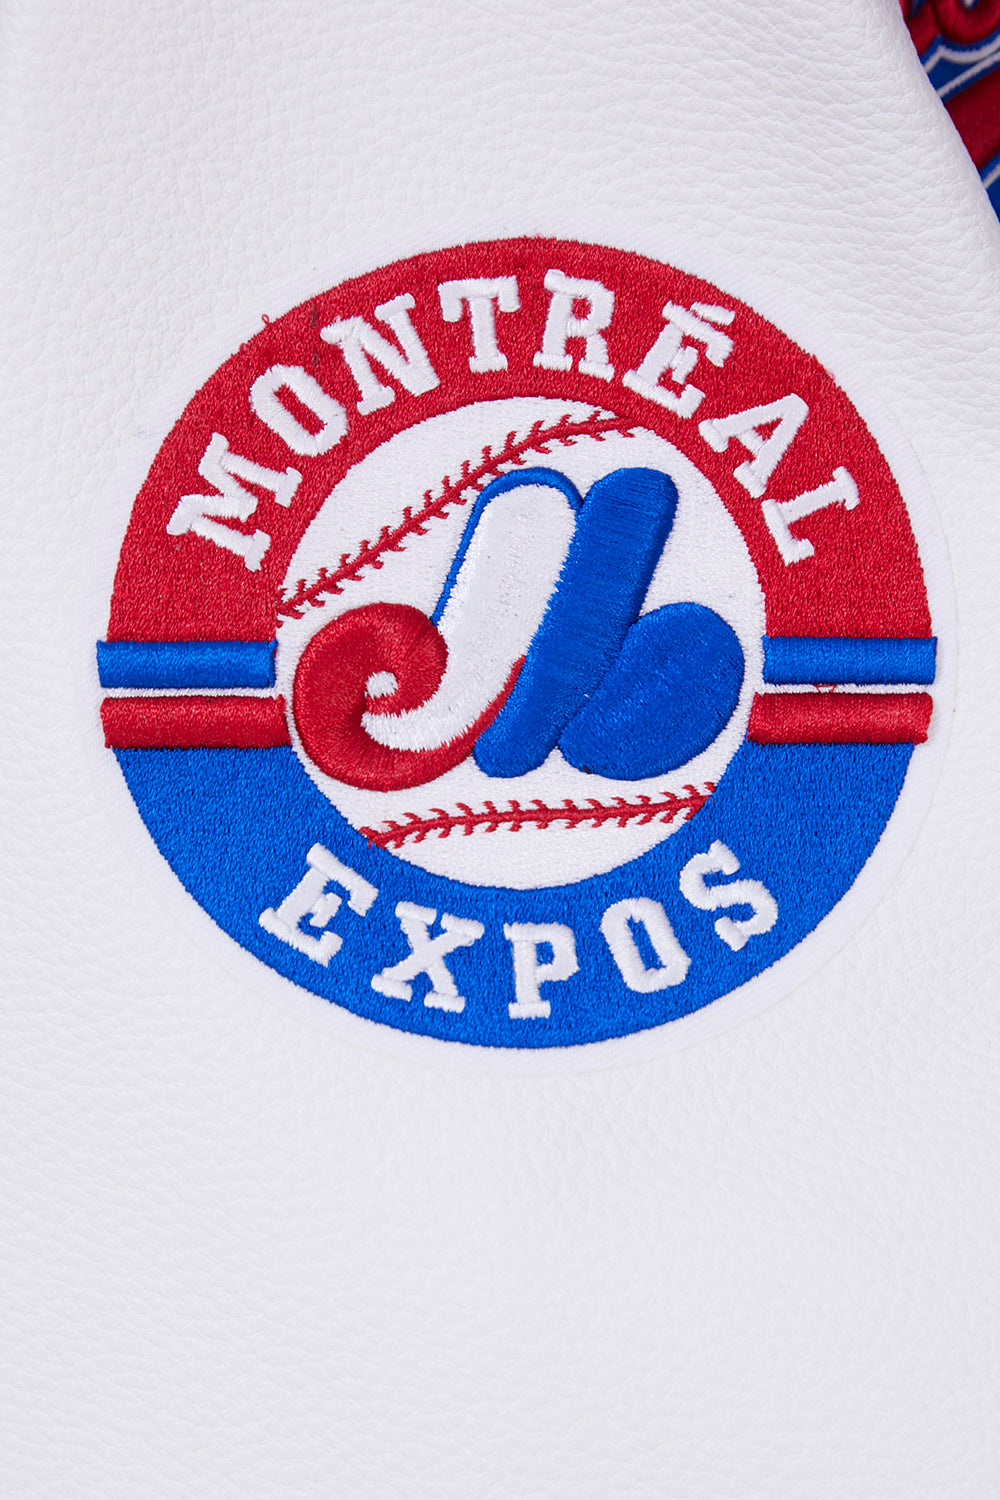 Montreal Expos Logo Iron On Patch - Beyond Vision Mall